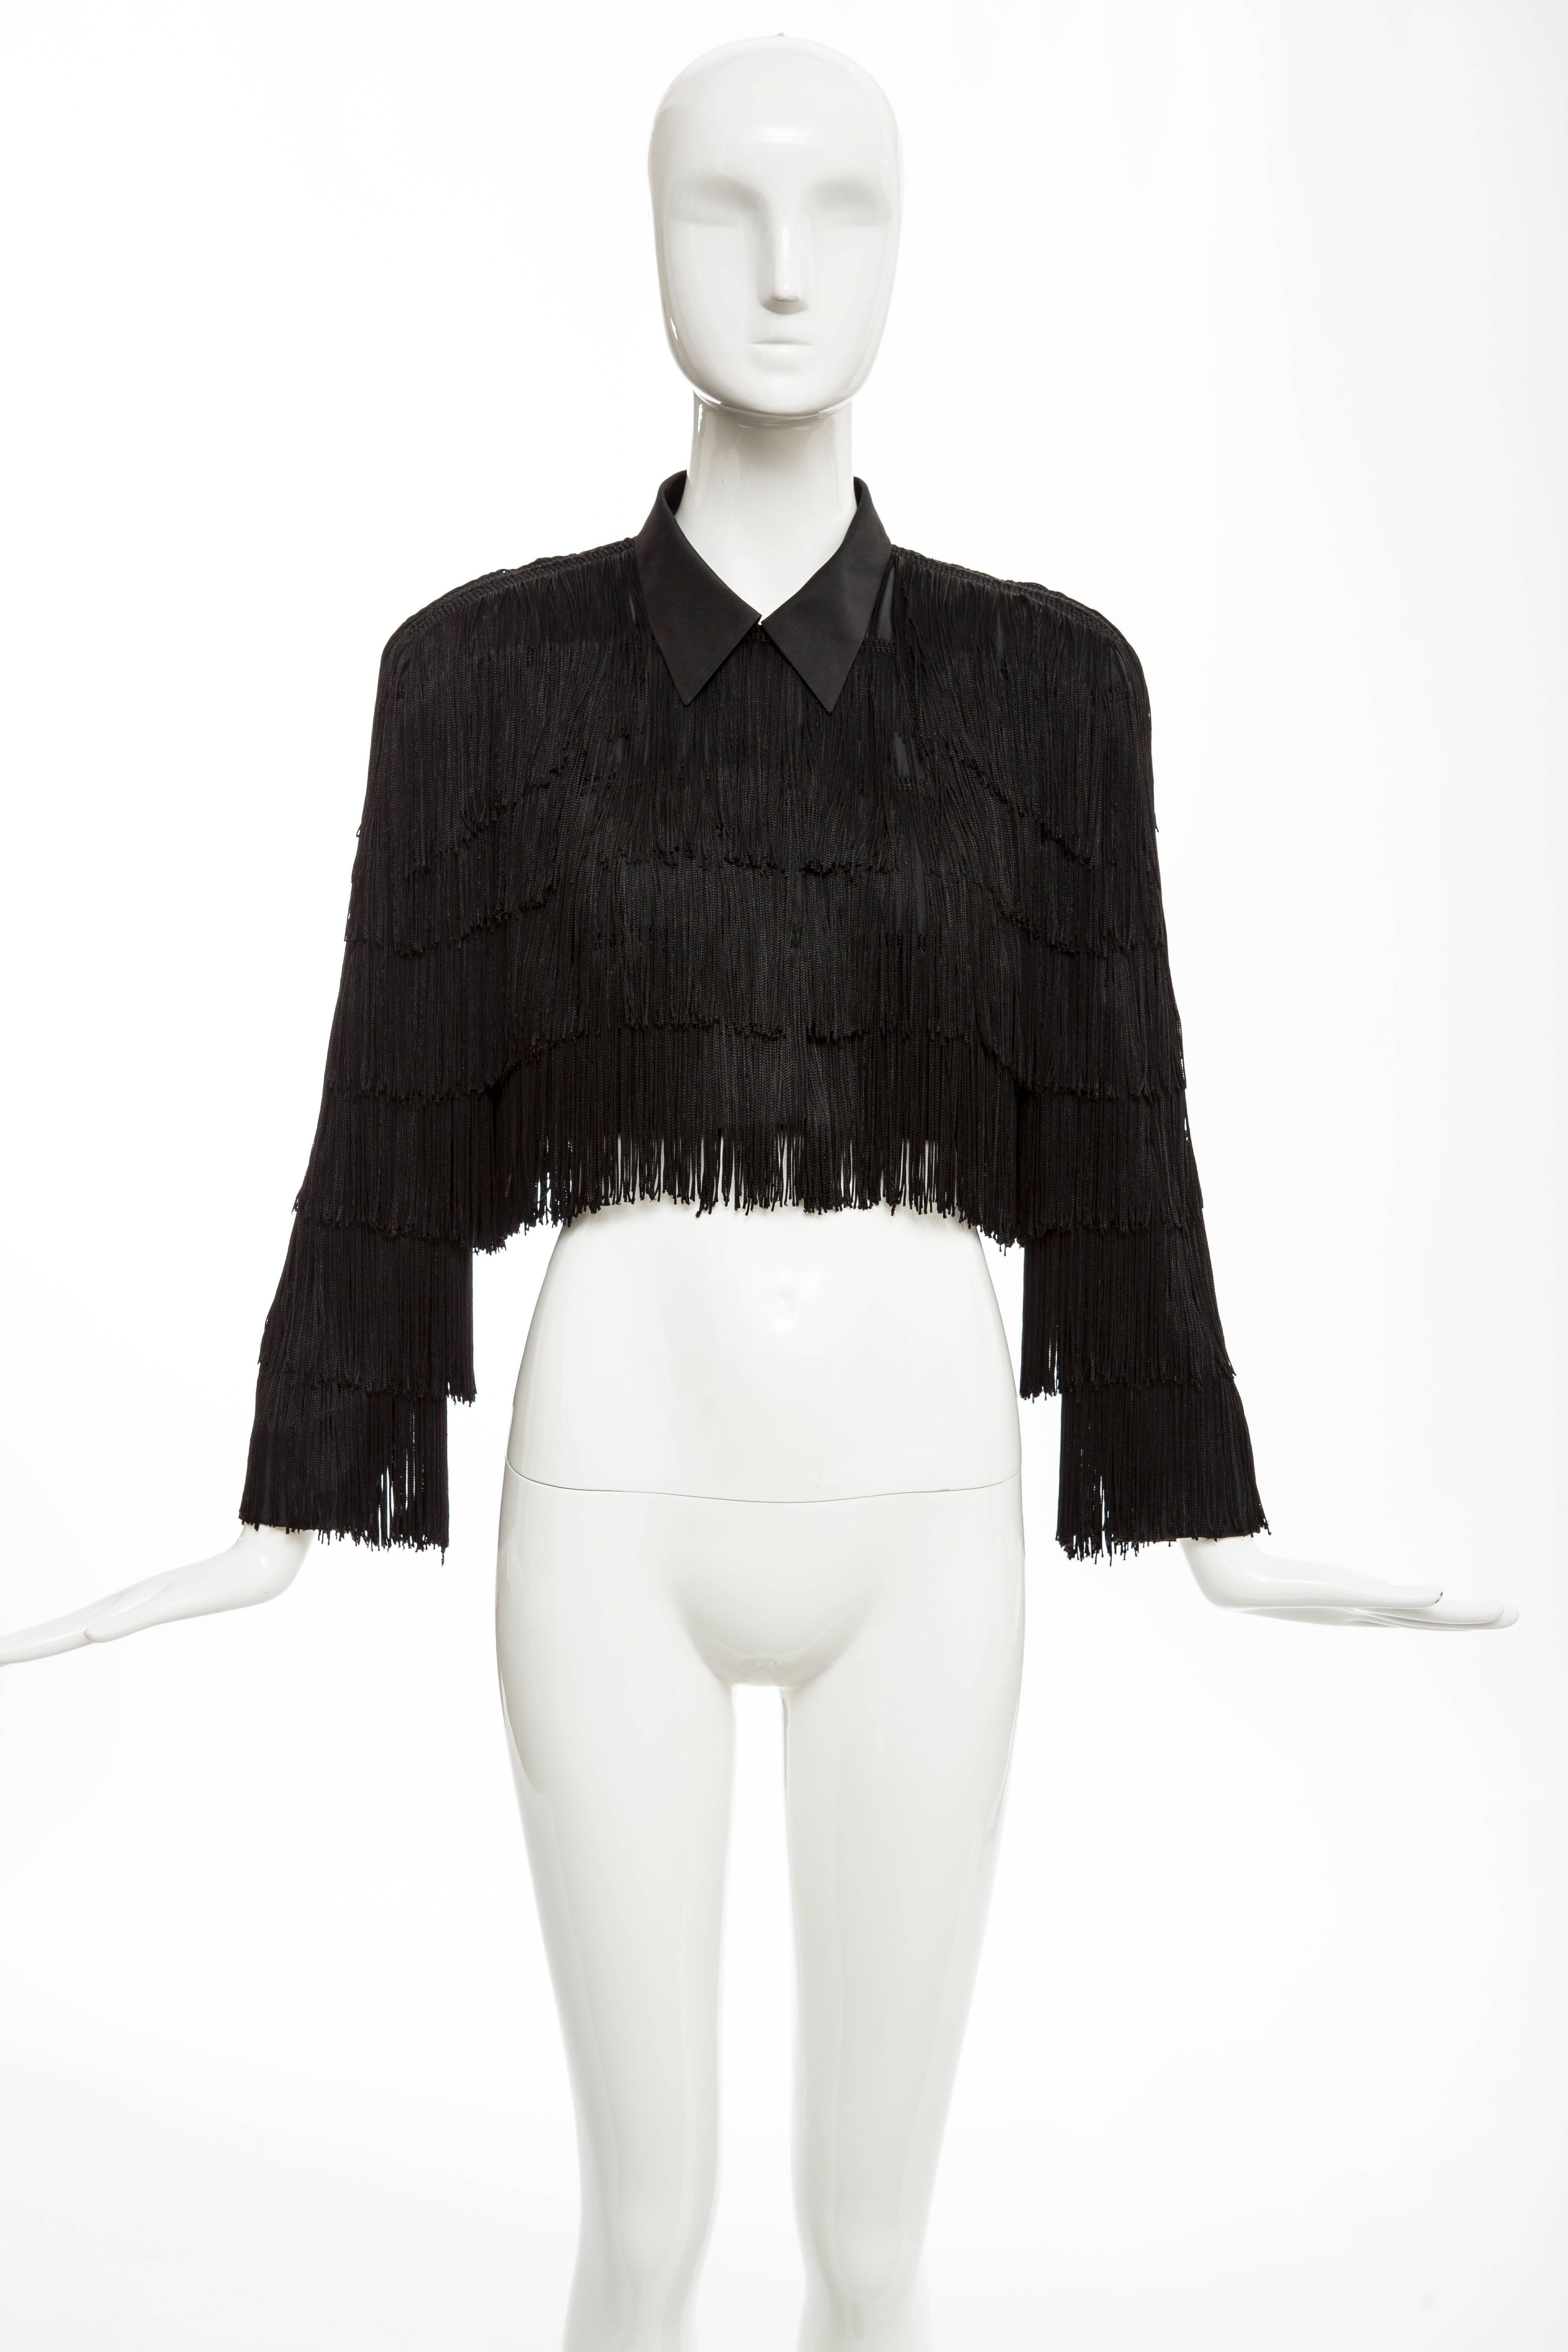 Norma Kamali OMO, circa 1980's, black fringe cropped jacket with front hidden button placket and hook-and-eye closure, shoulder pads and fully lined.

US. 6

Bust 39, Waist 30, Length 15